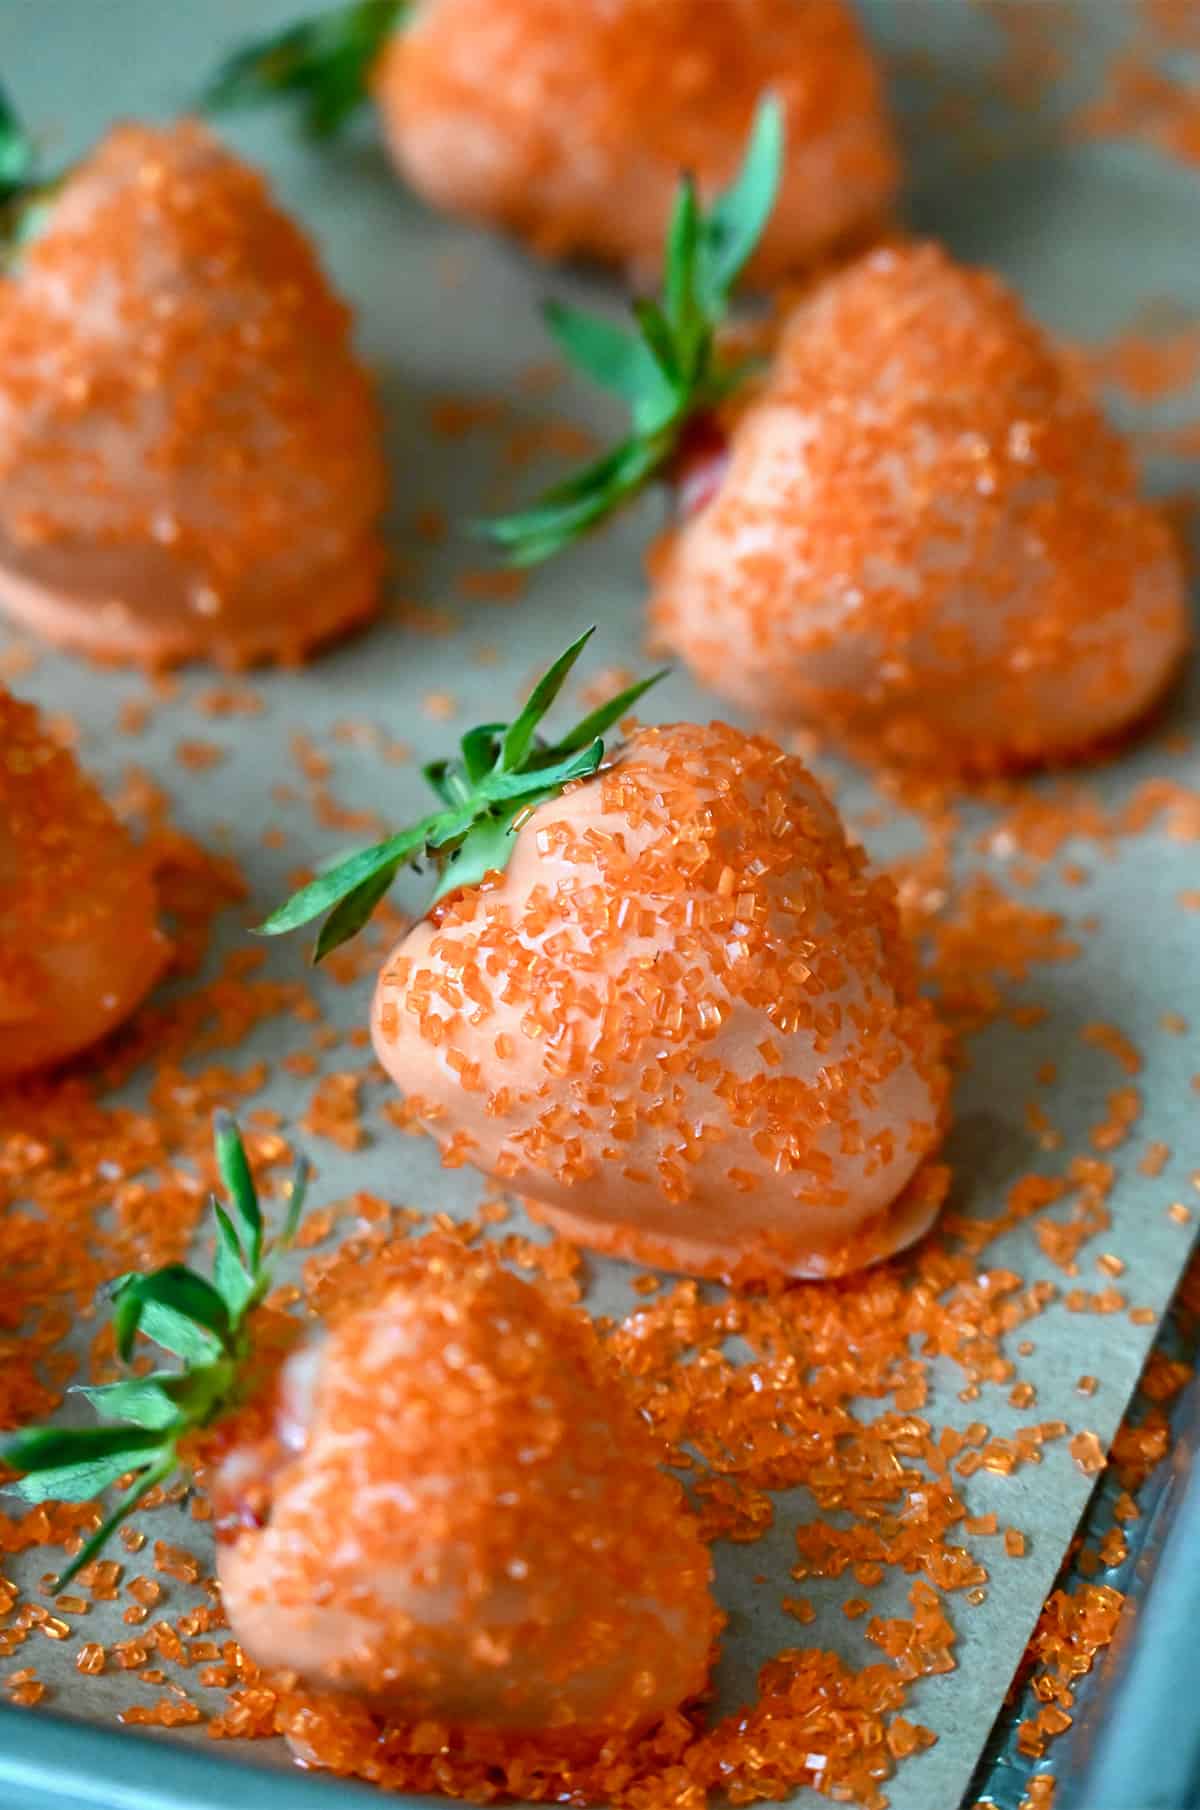 Strawberries dipped in orange candy melts and coated in orange sanding sugar on a parchment-lined baking sheet.